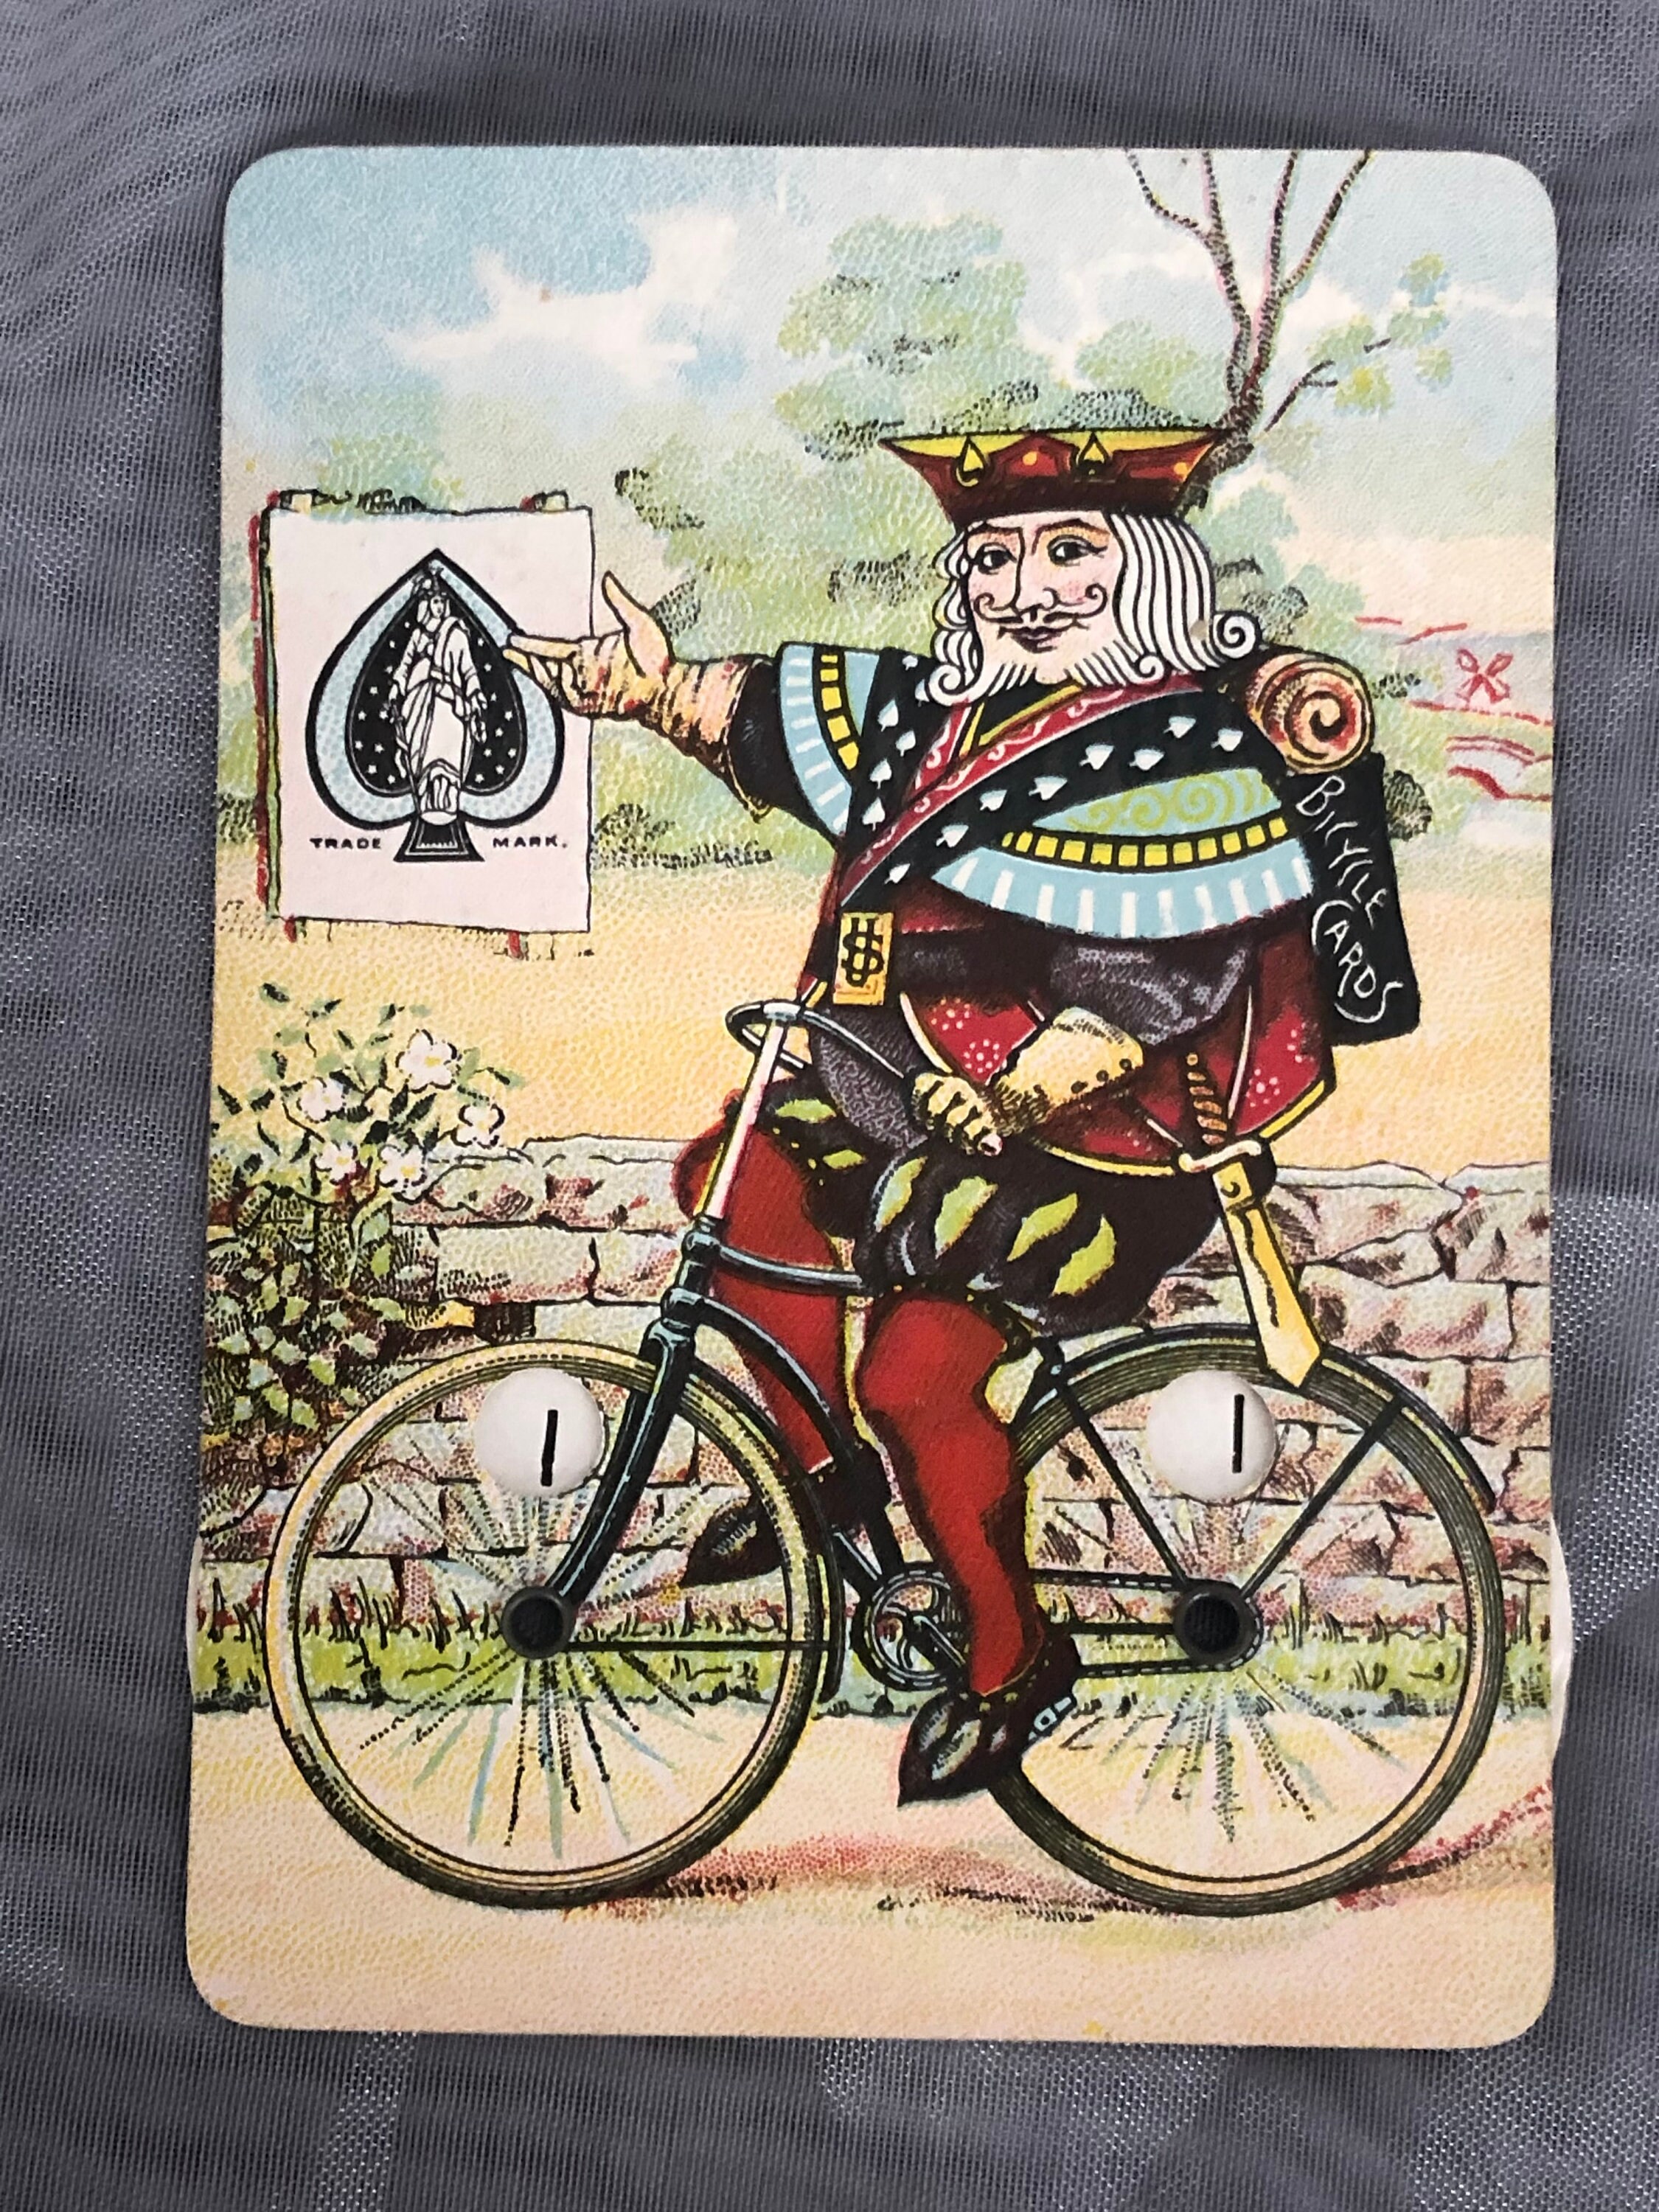 Russell & Morgan Bicycle Playing Cards the United States Printing